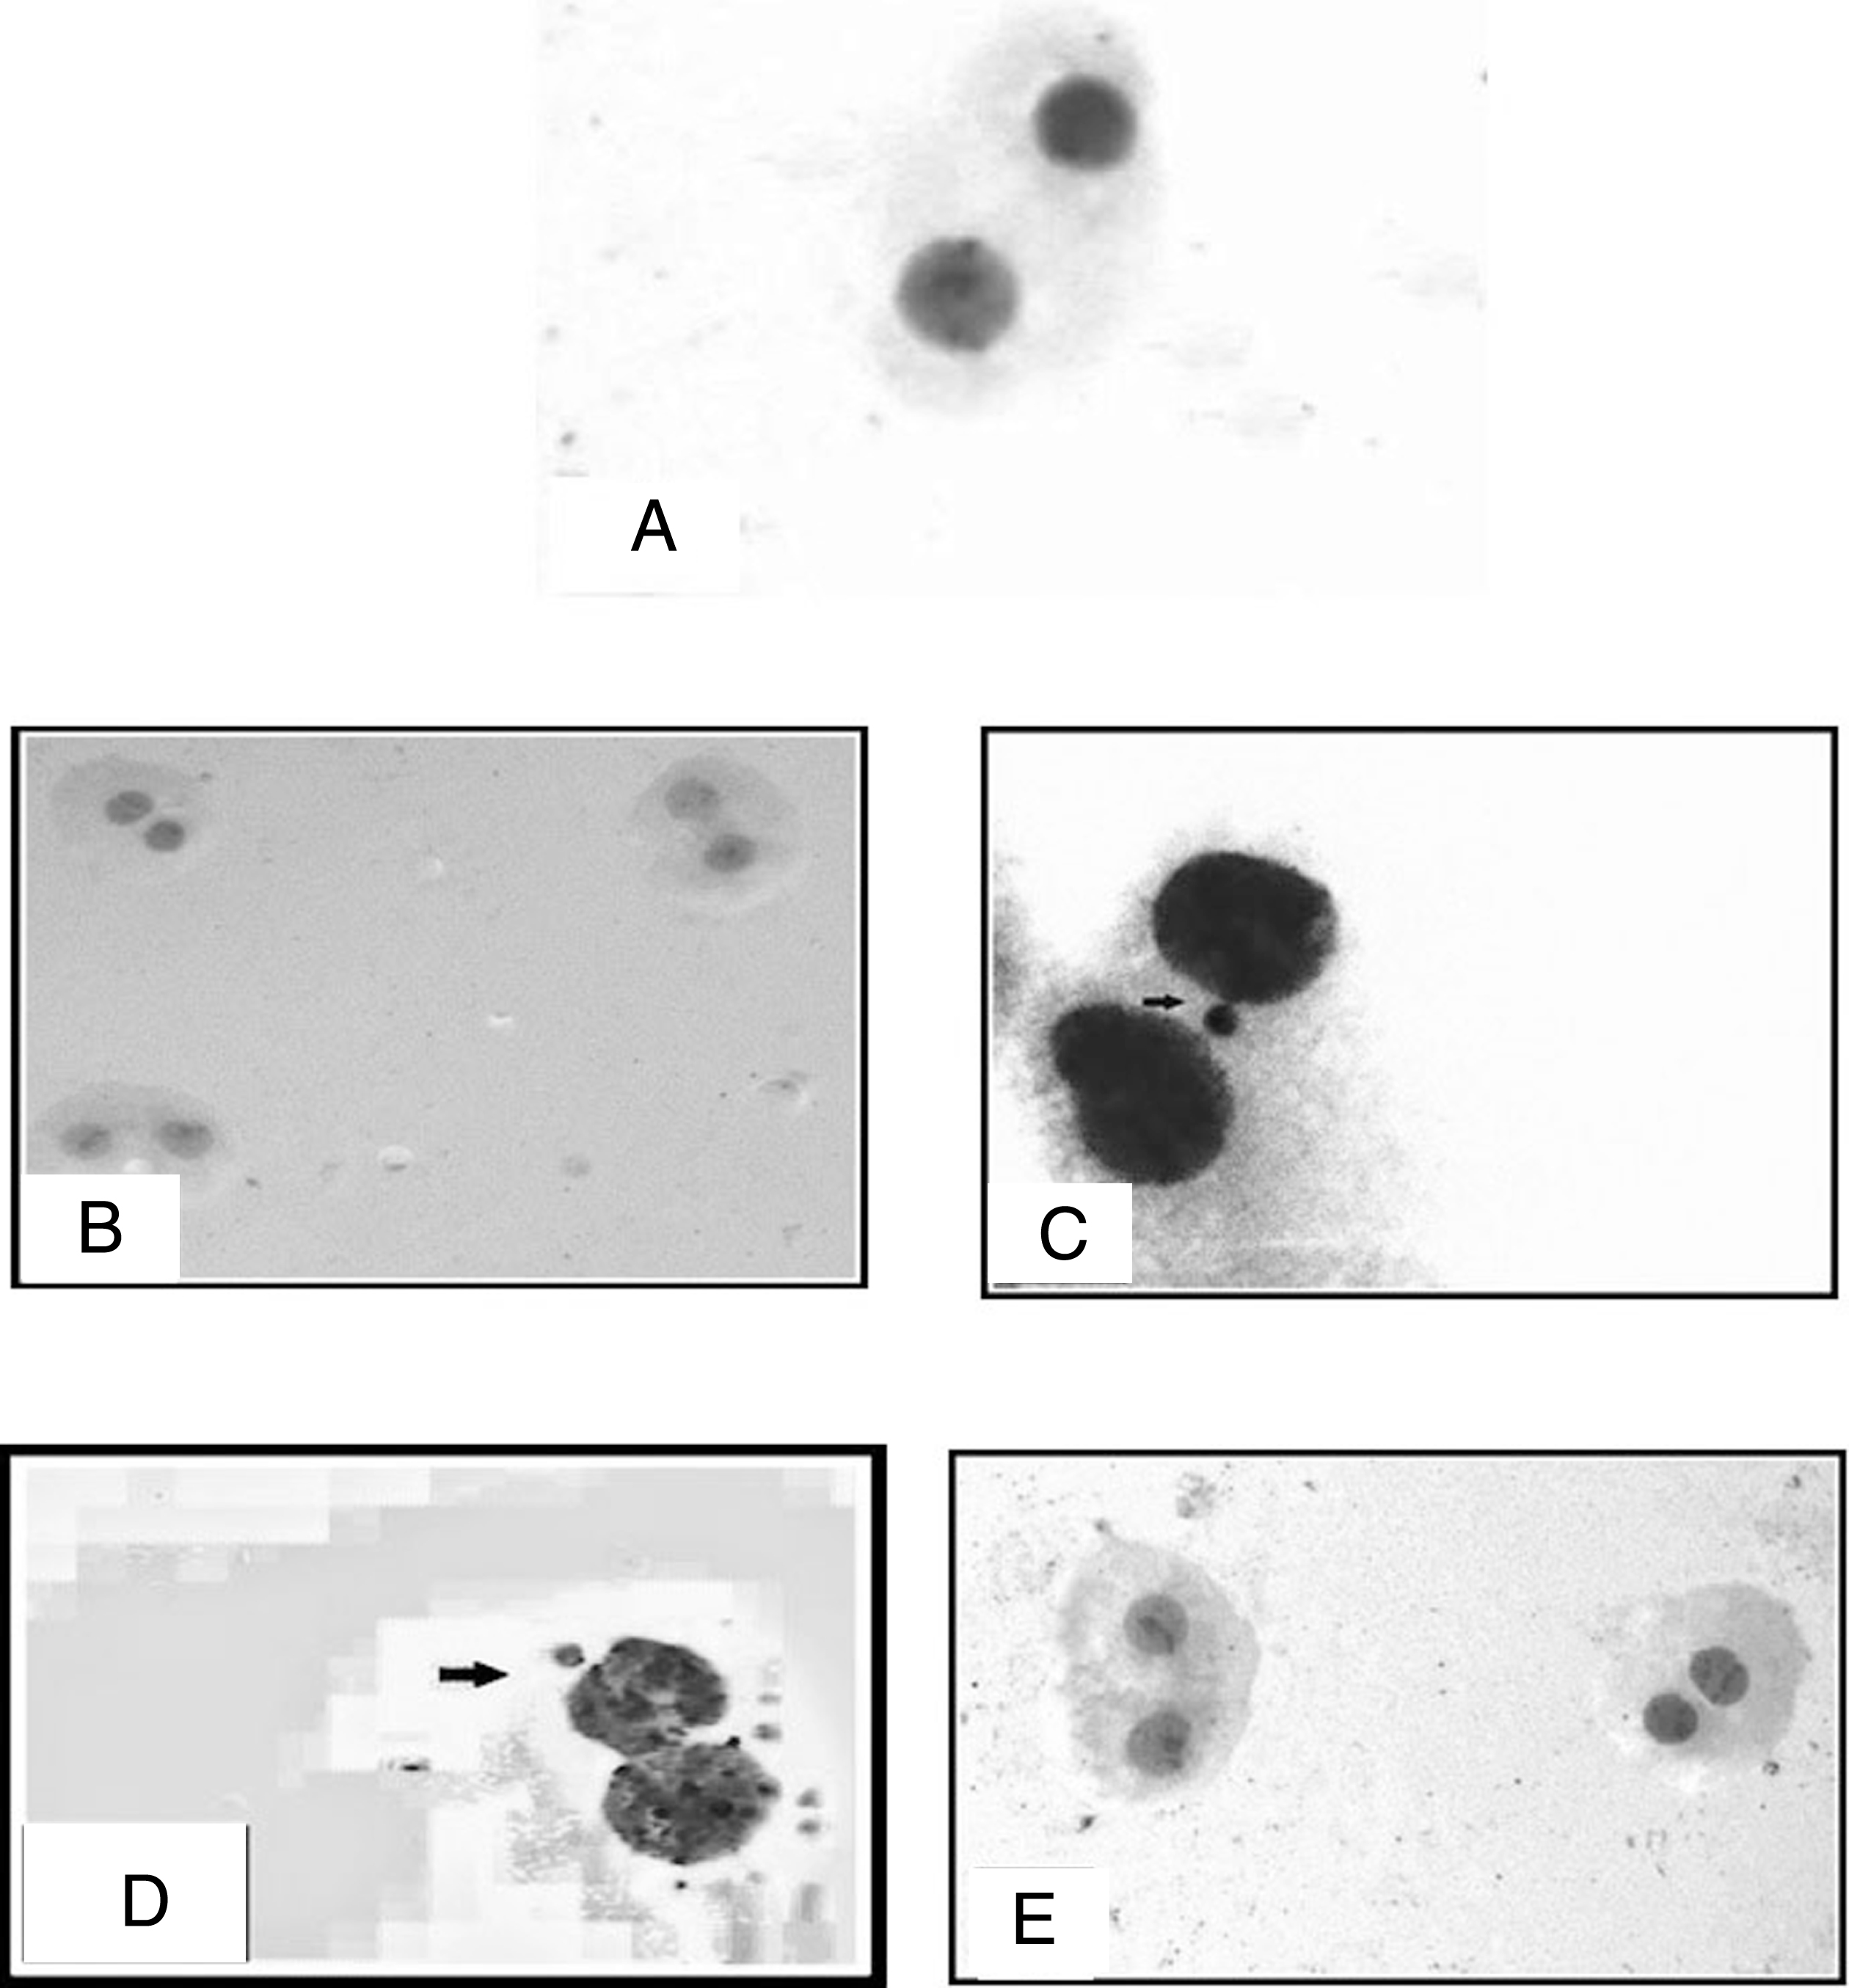 Photomicrographs of HepG2 cells stained by Geimsa stain A: control HepG2 cells B: Cells treated with honey C: Cells treated with residue showing binucleated cell containing micronucleus (arrow) D: Cells treated with ethyl acetate fraction showing binucleated cell containing micronuclei (thick arrow) E: Cells treated with Chloroform- methanol fraction showing multiple binucleated cells without micronuclei. The micronucleus has a similar appearance and intensity to the main nuclei (10×40).